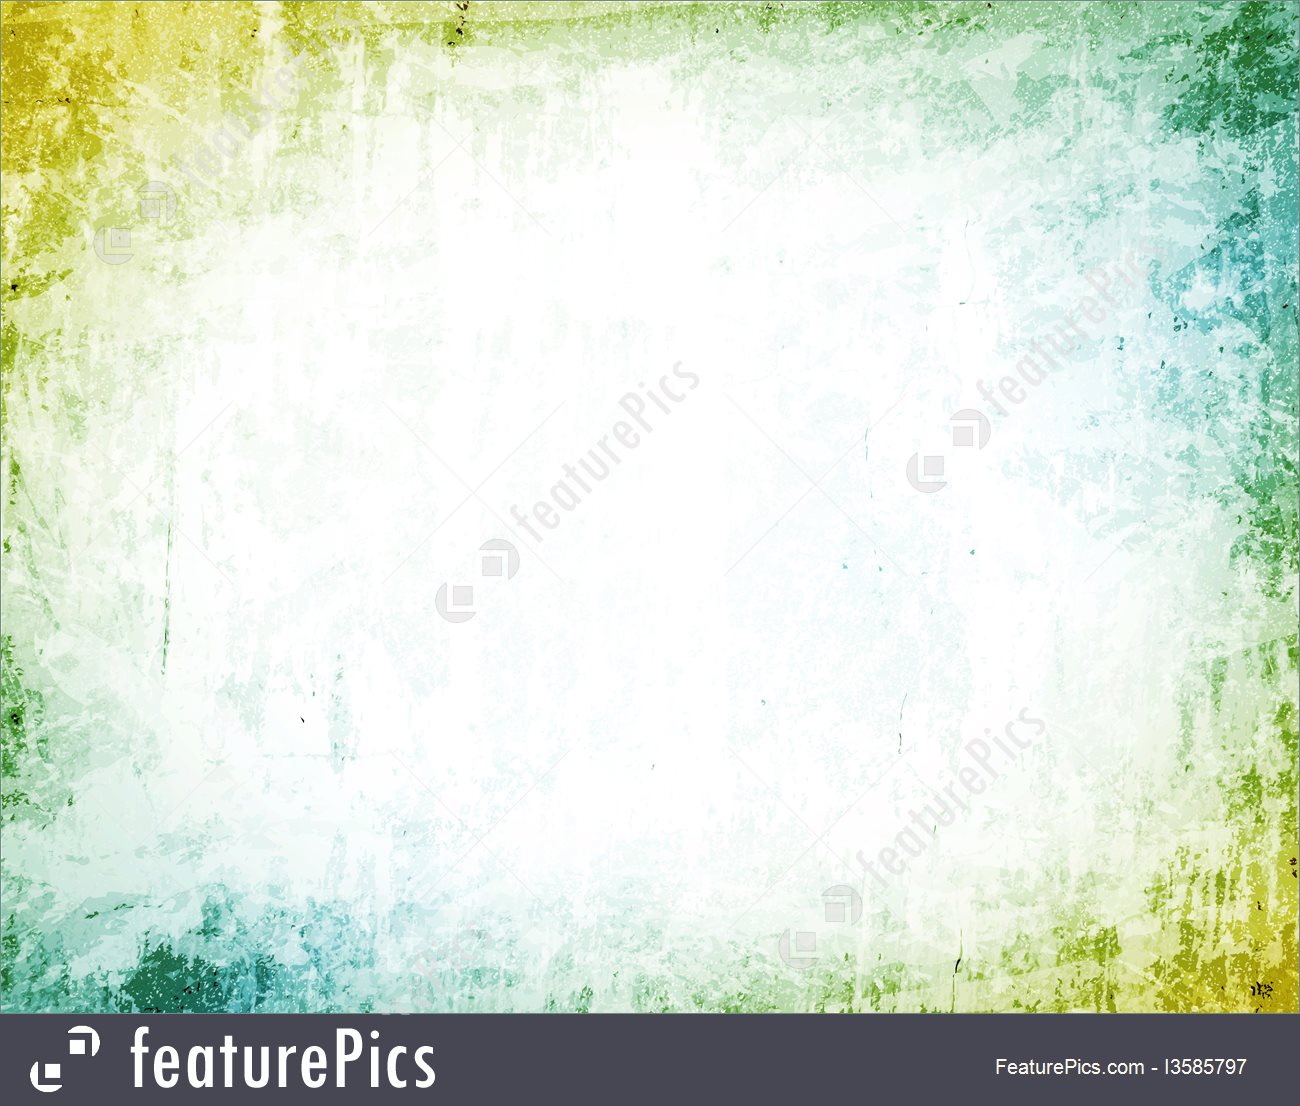 Abstract Framed Background